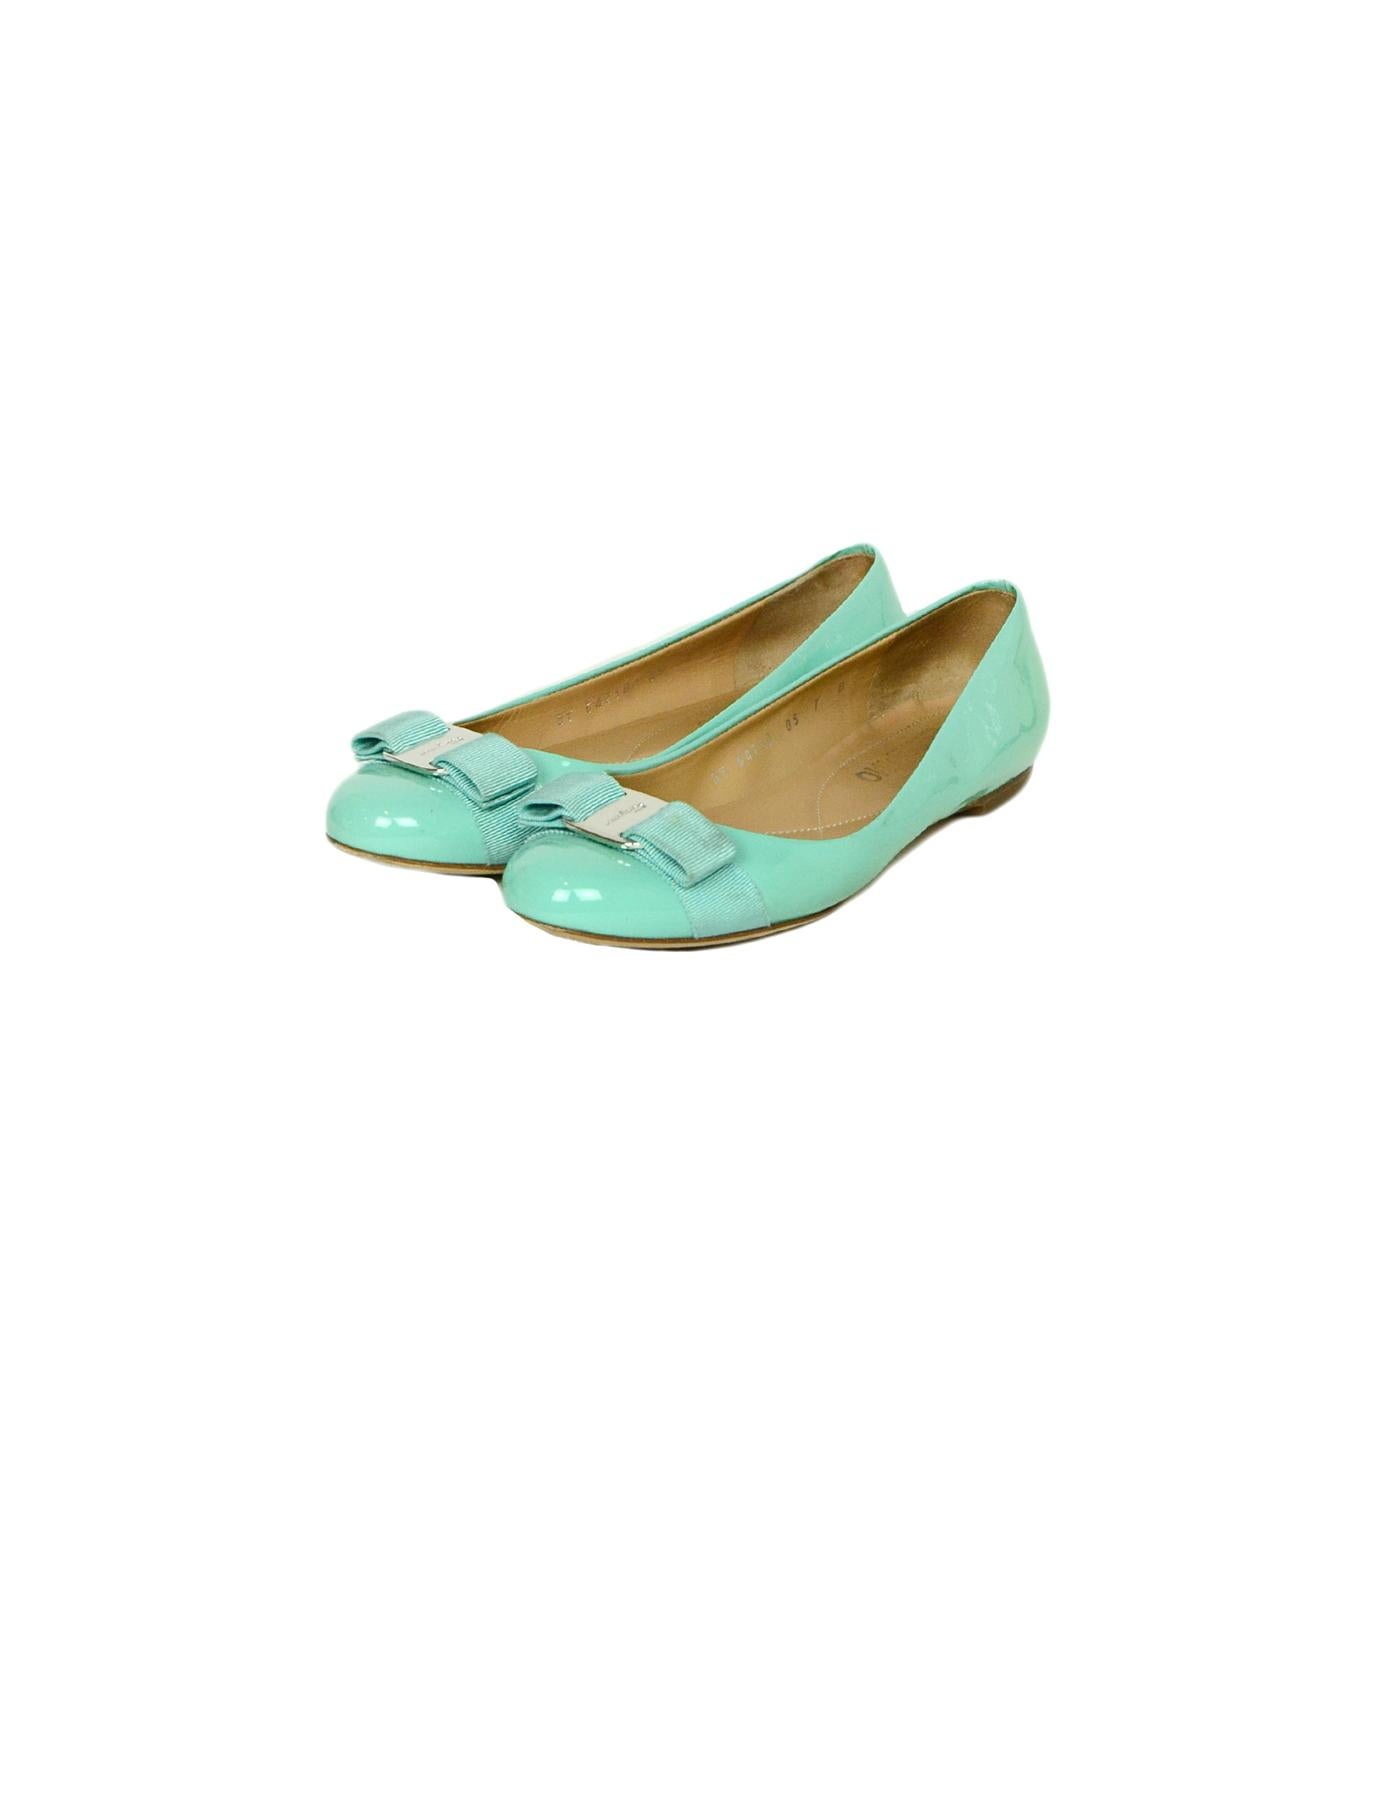 Ferragamo Turquoise Patent Leather Vera Ballet Flats sz 7

Made In: Italy
Color: Turquoise
Hardware: Silvertone
Materials: Patent Leather
Closure/Opening: Slip-on
Overall Condition: Good pre-owned condition, light wear on tips, soles, and insoles.